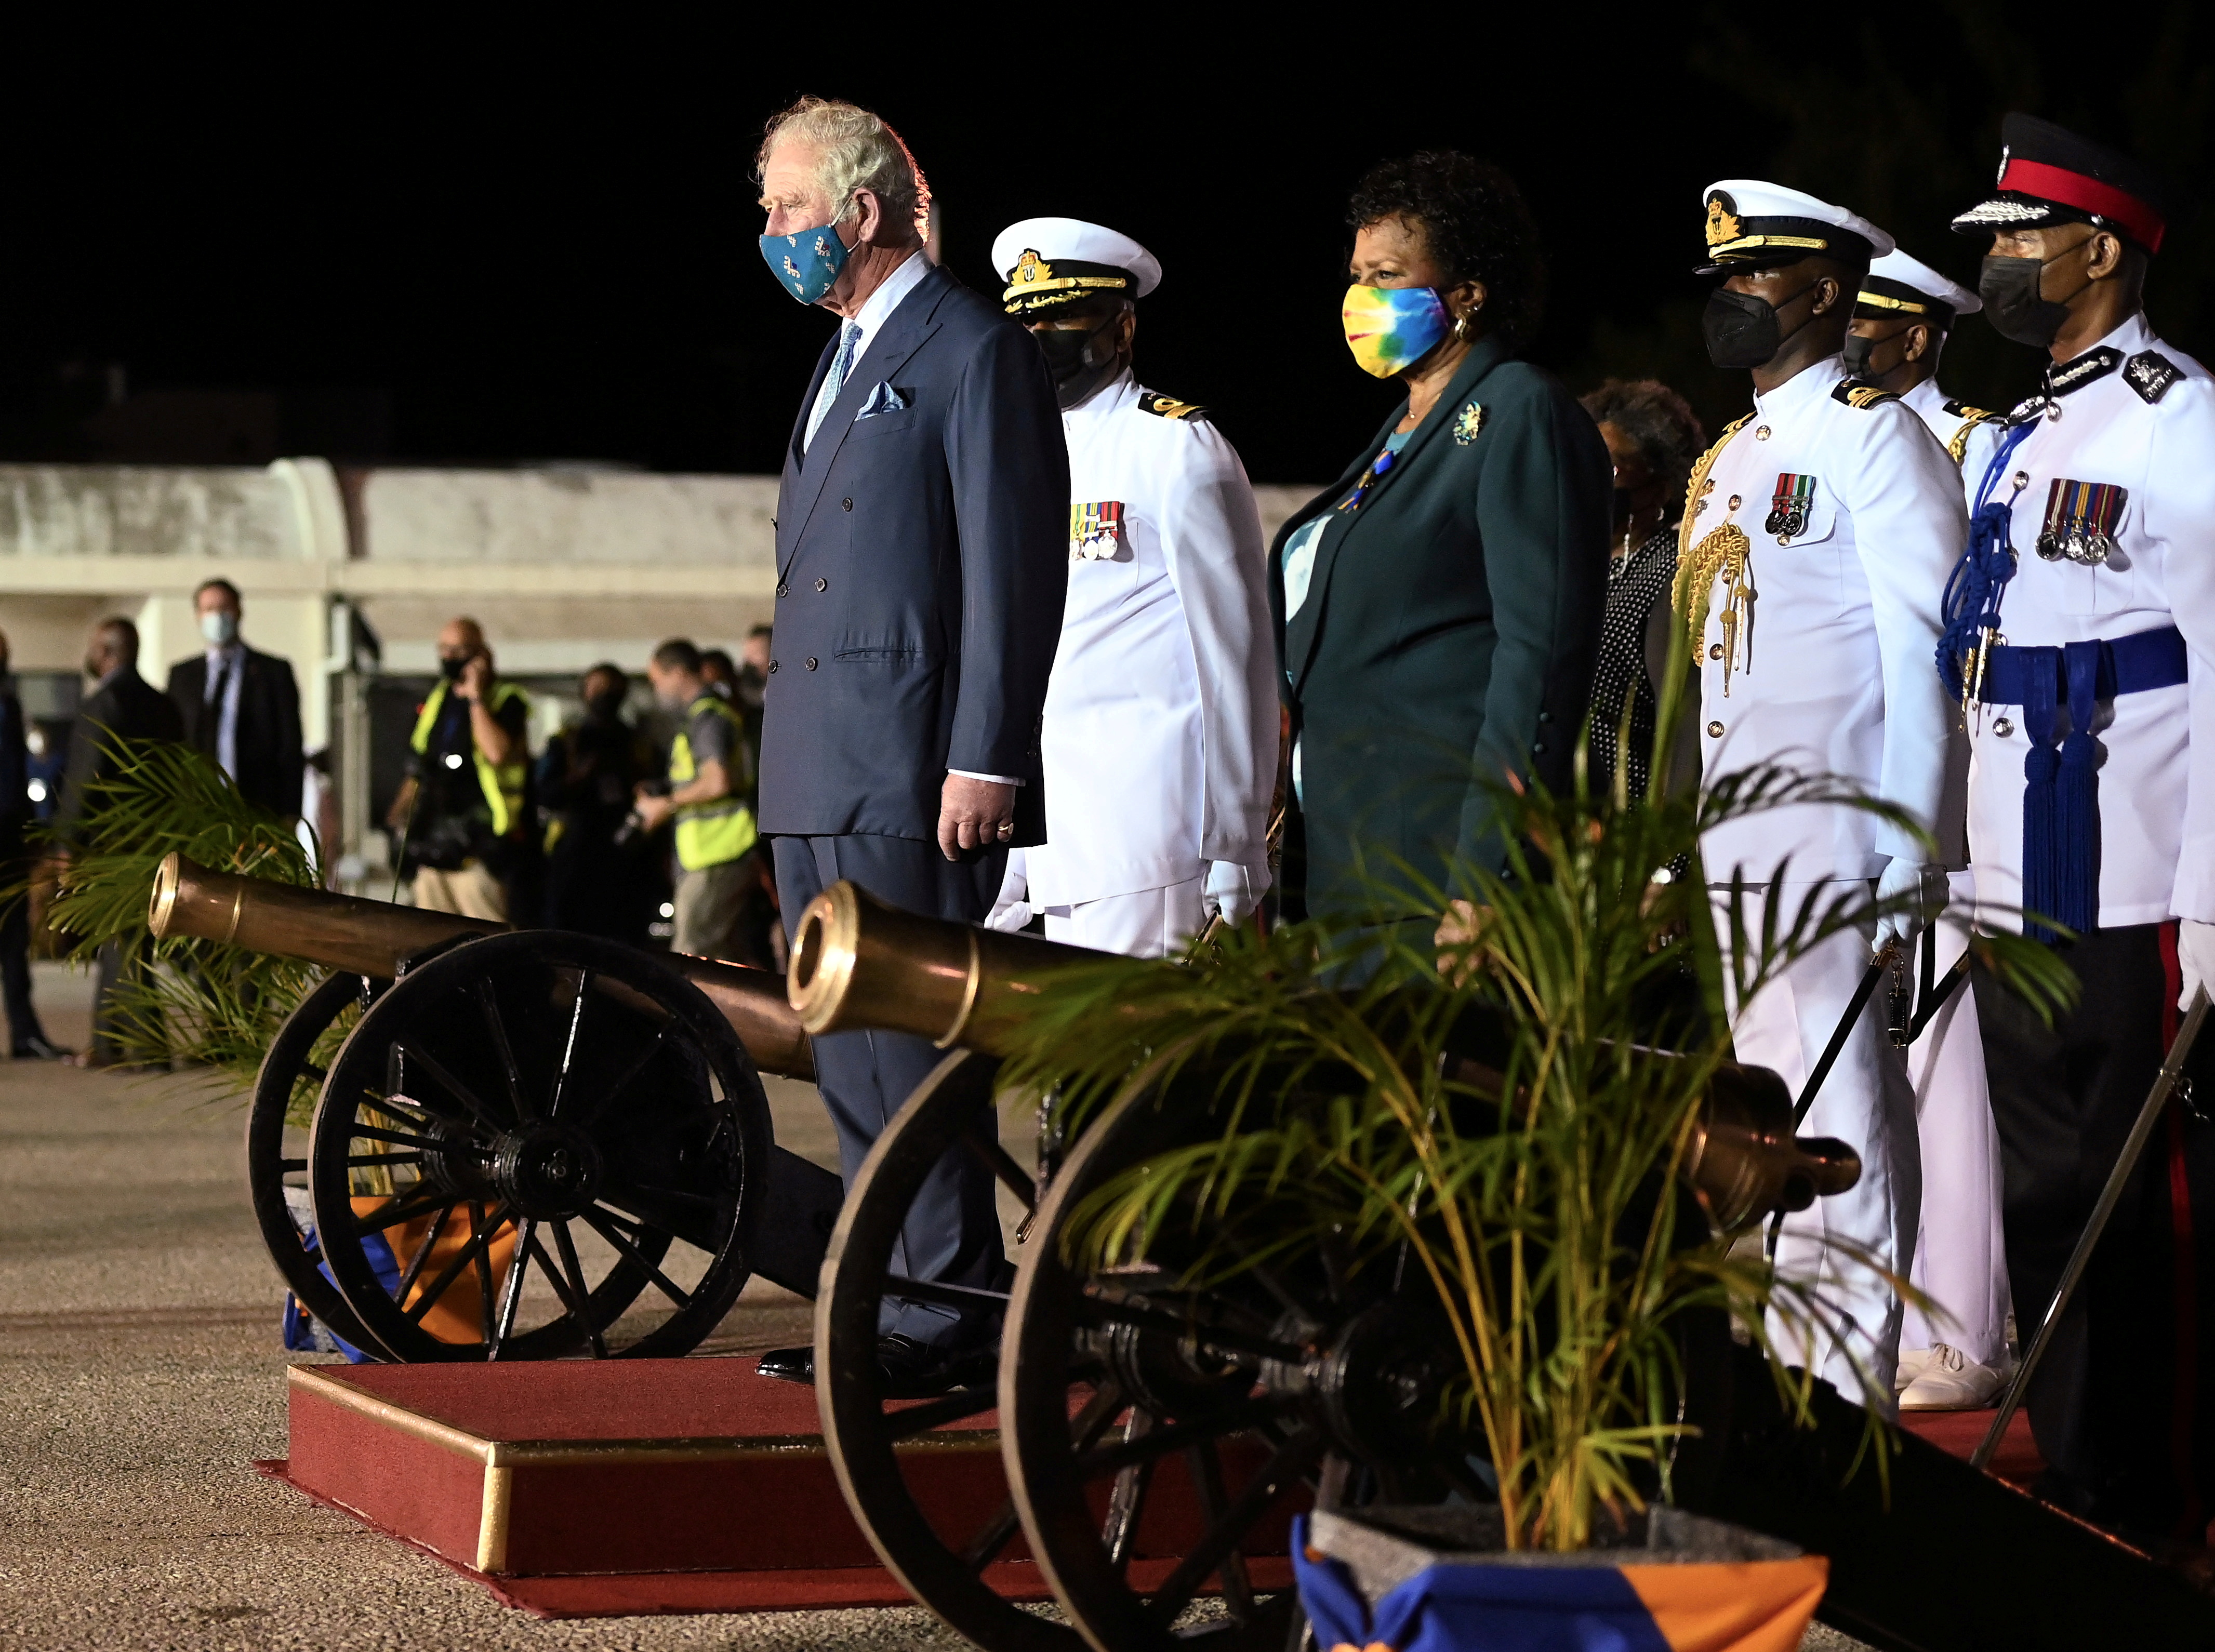 Barbados becomes republic tonight as Queen replaced as head of state - CGTN